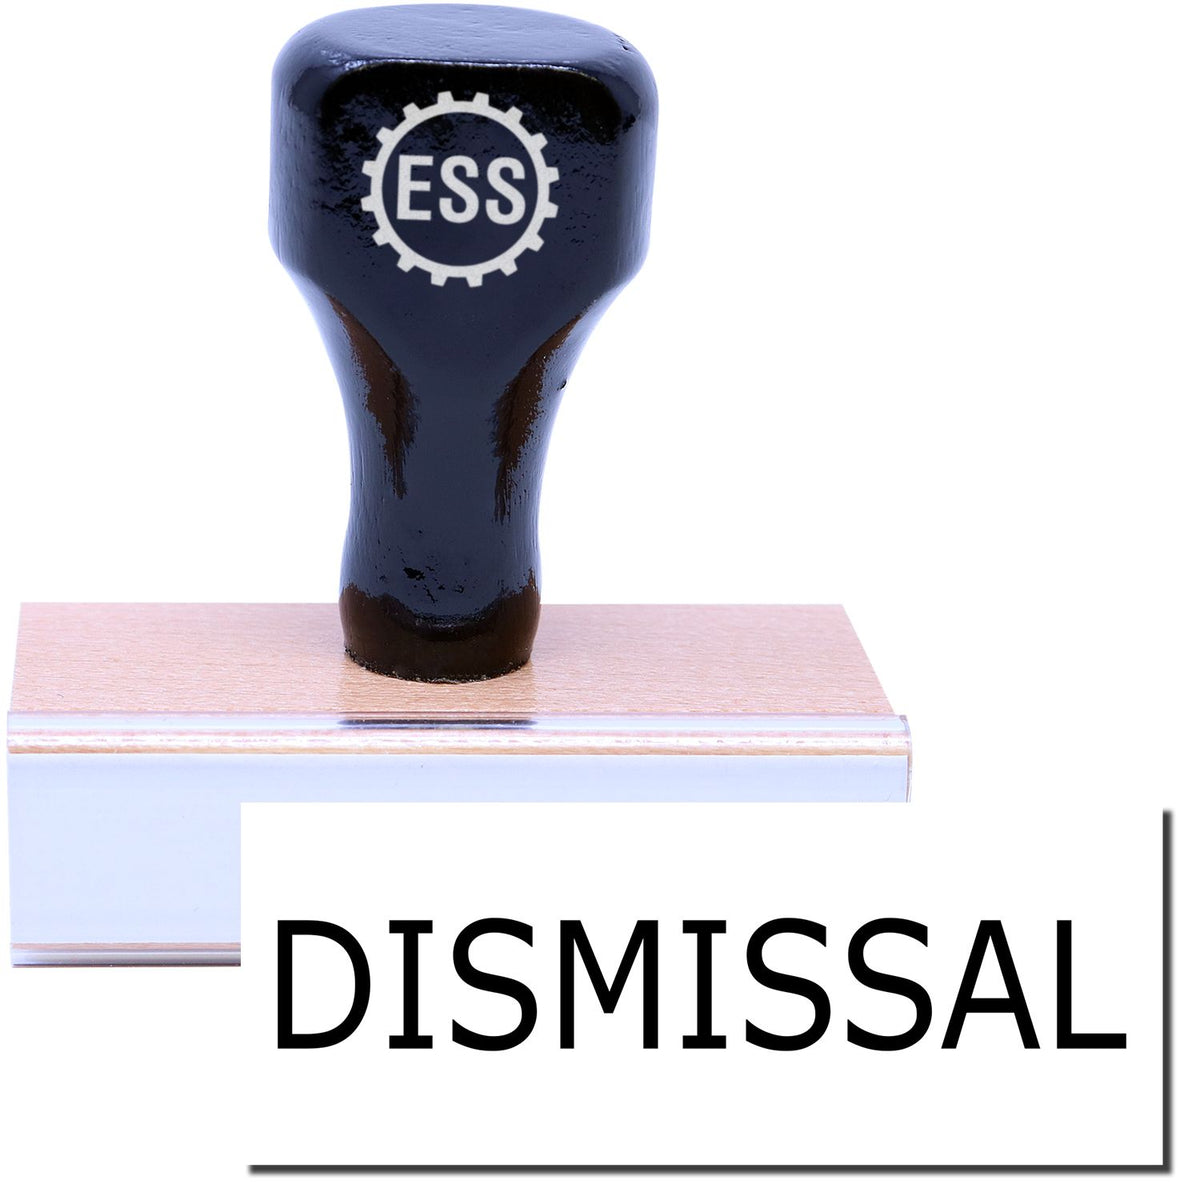 A stock office rubber stamp with a stamped image showing how the text &quot;DISMISSAL&quot; in a large font is displayed after stamping.